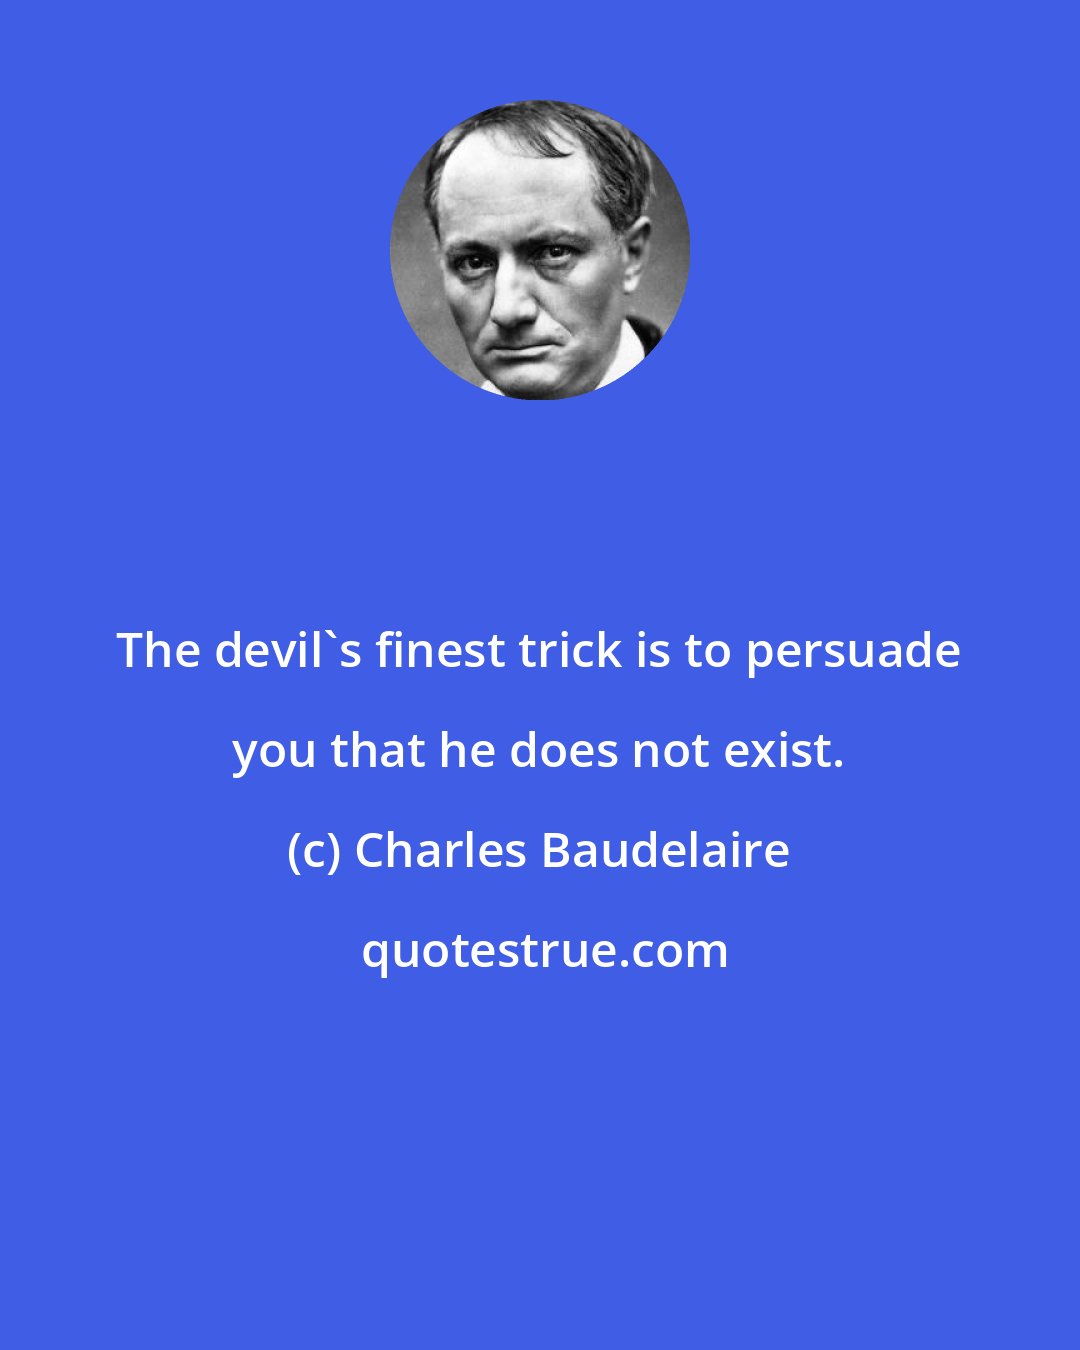 Charles Baudelaire: The devil's finest trick is to persuade you that he does not exist.